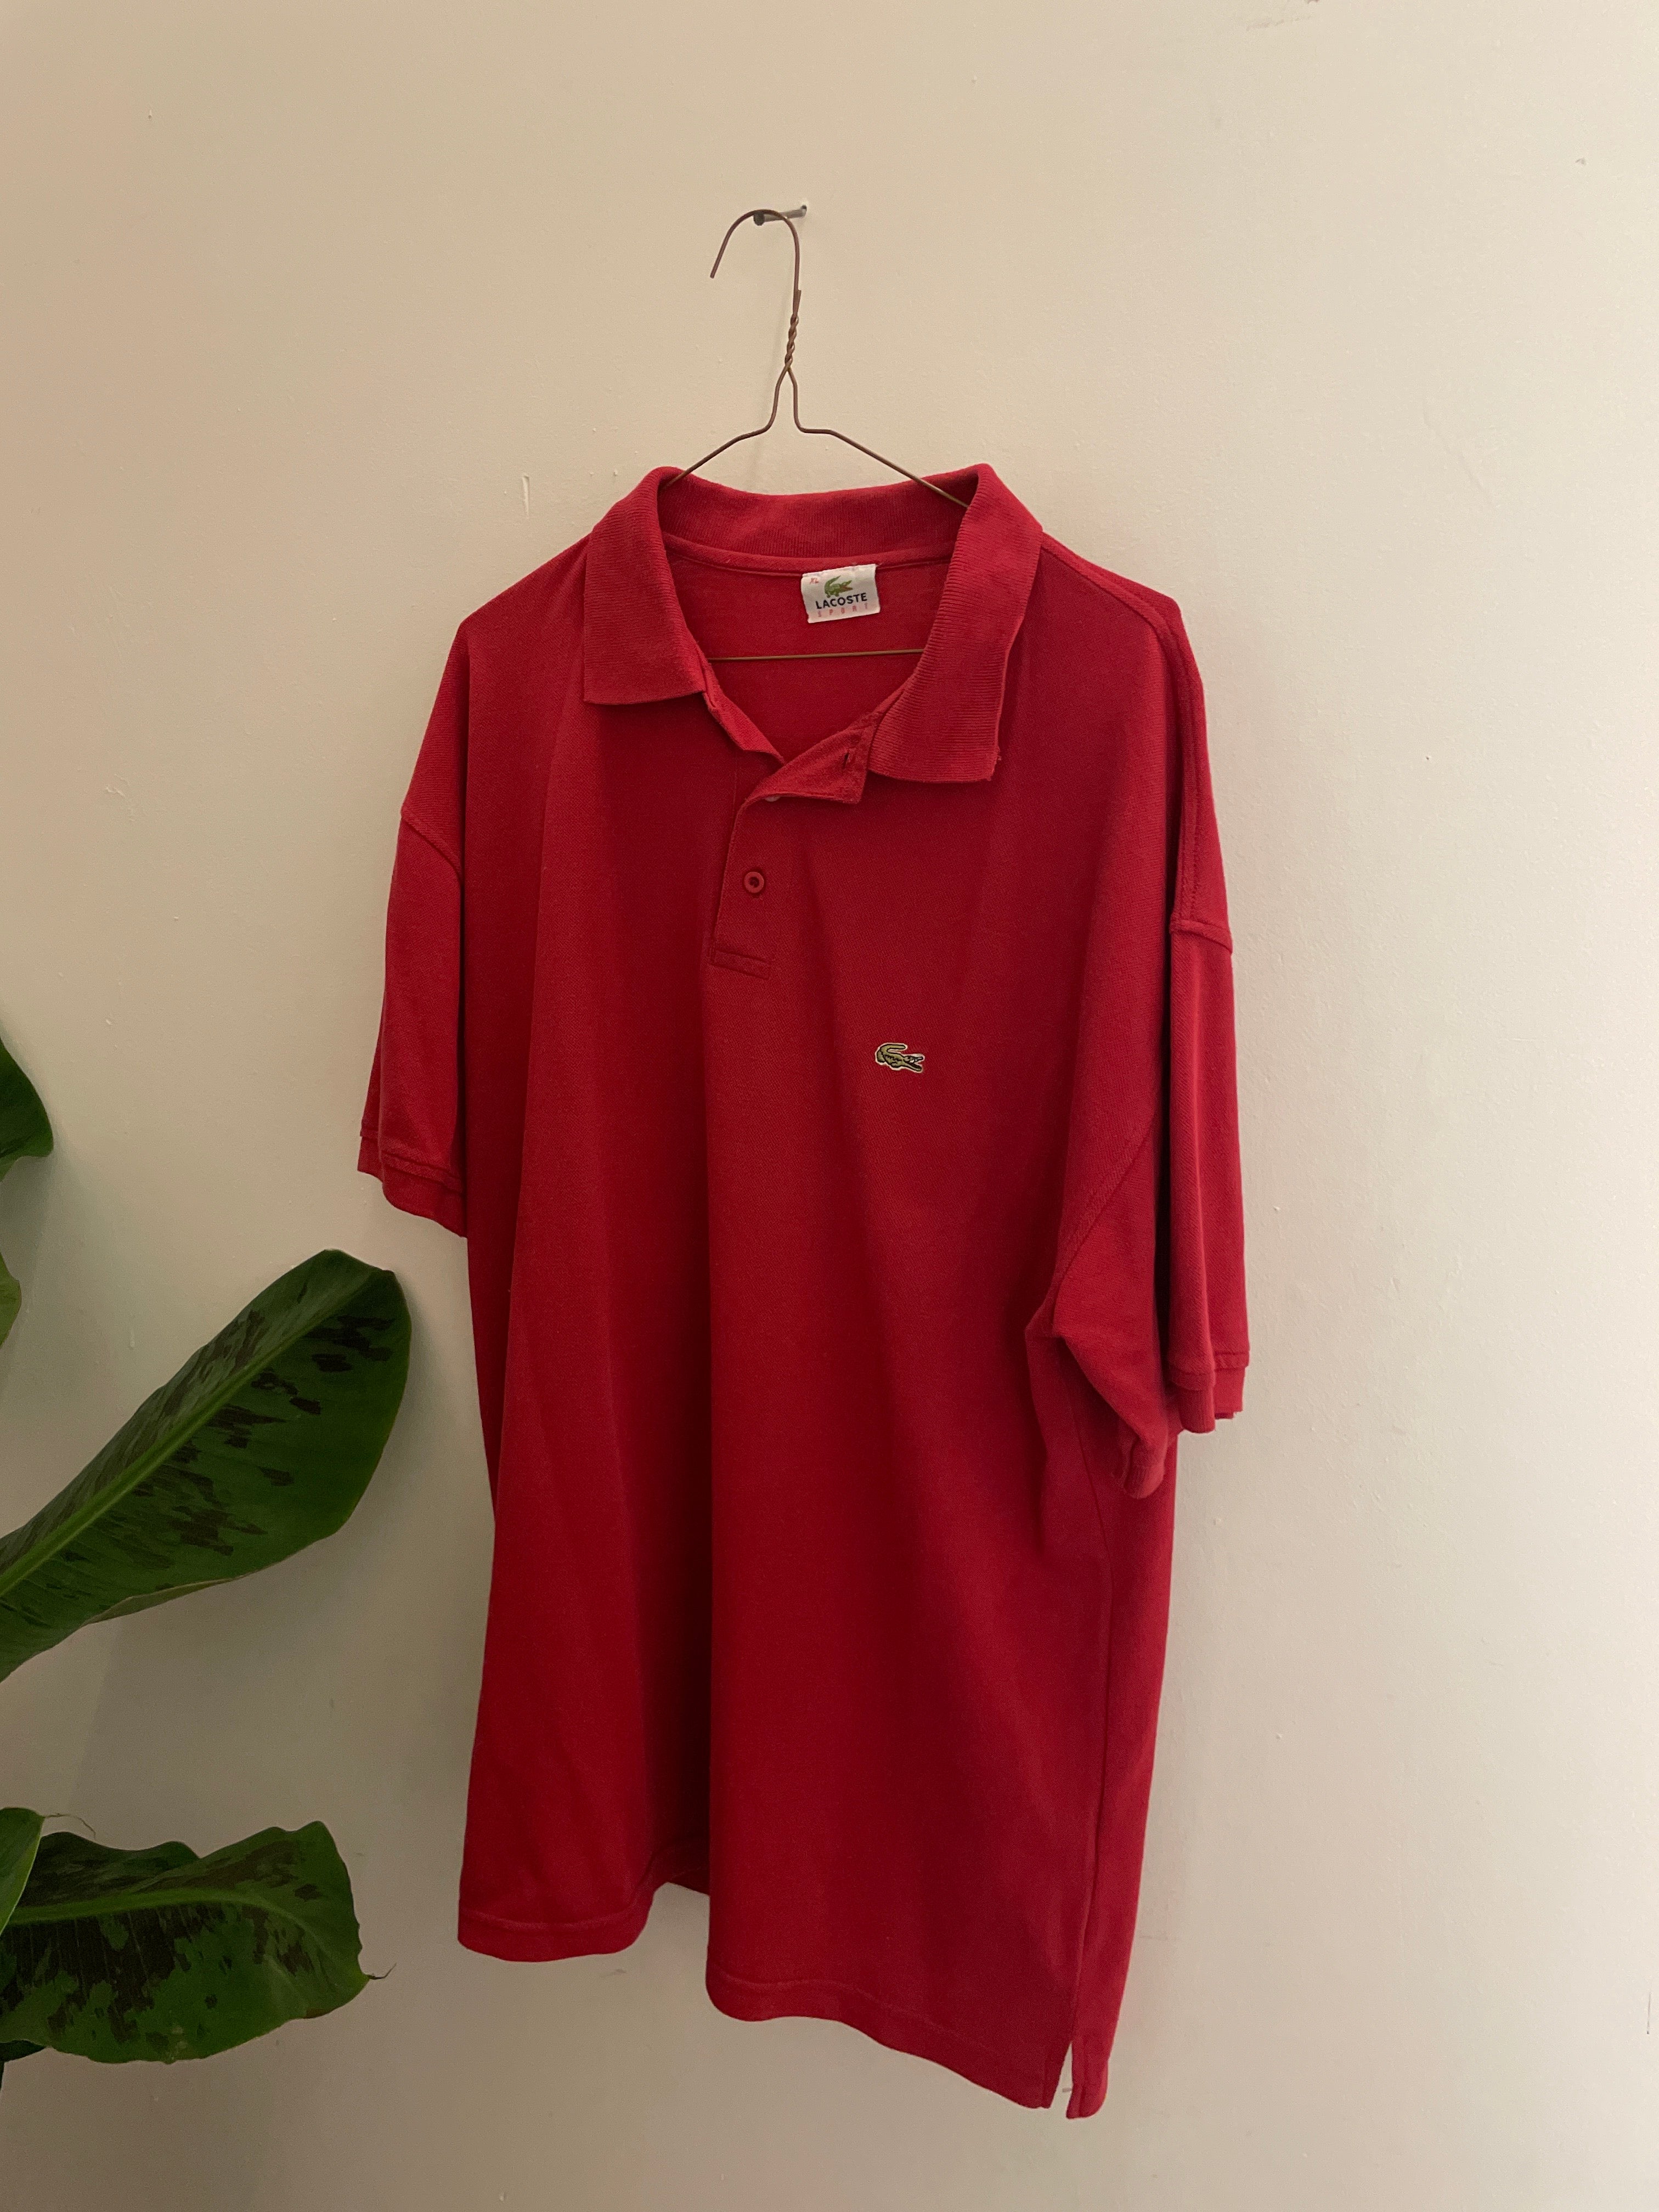 Vintage red regular fit lacoste sport mens polo shirt size XL